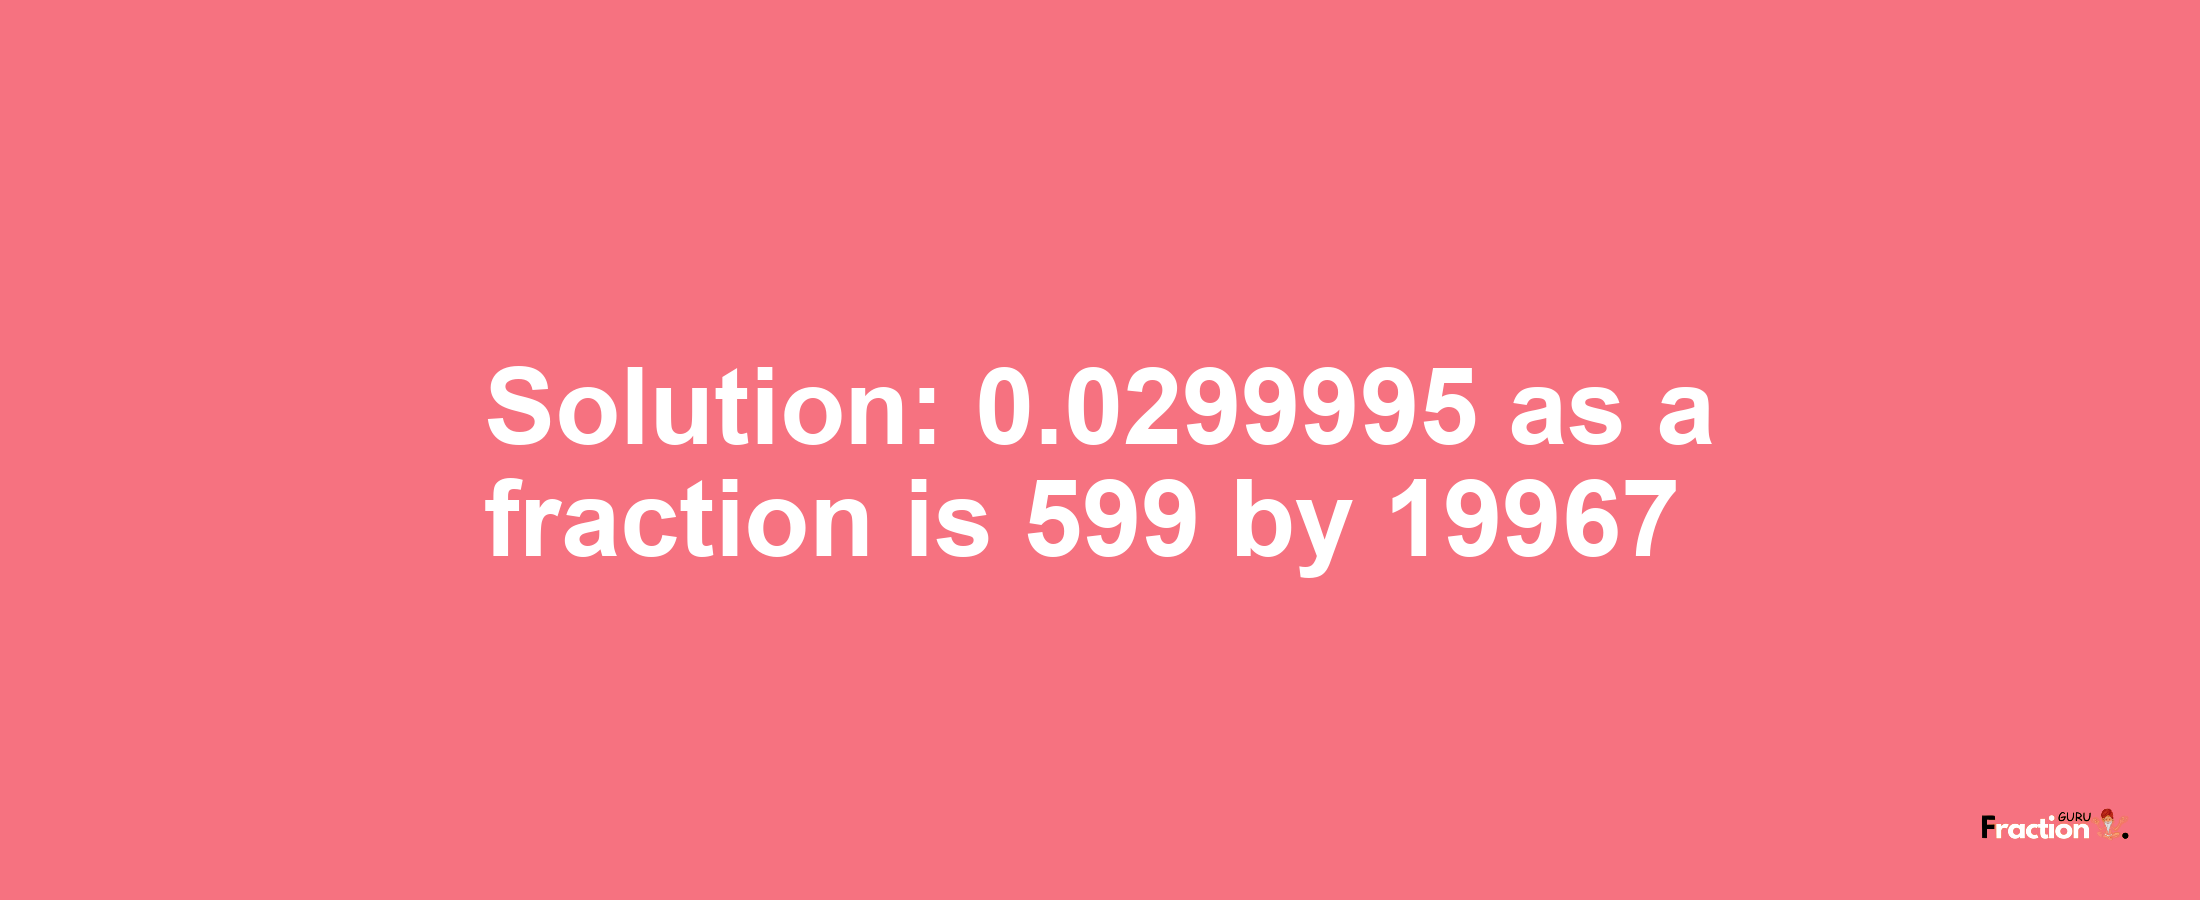 Solution:0.0299995 as a fraction is 599/19967